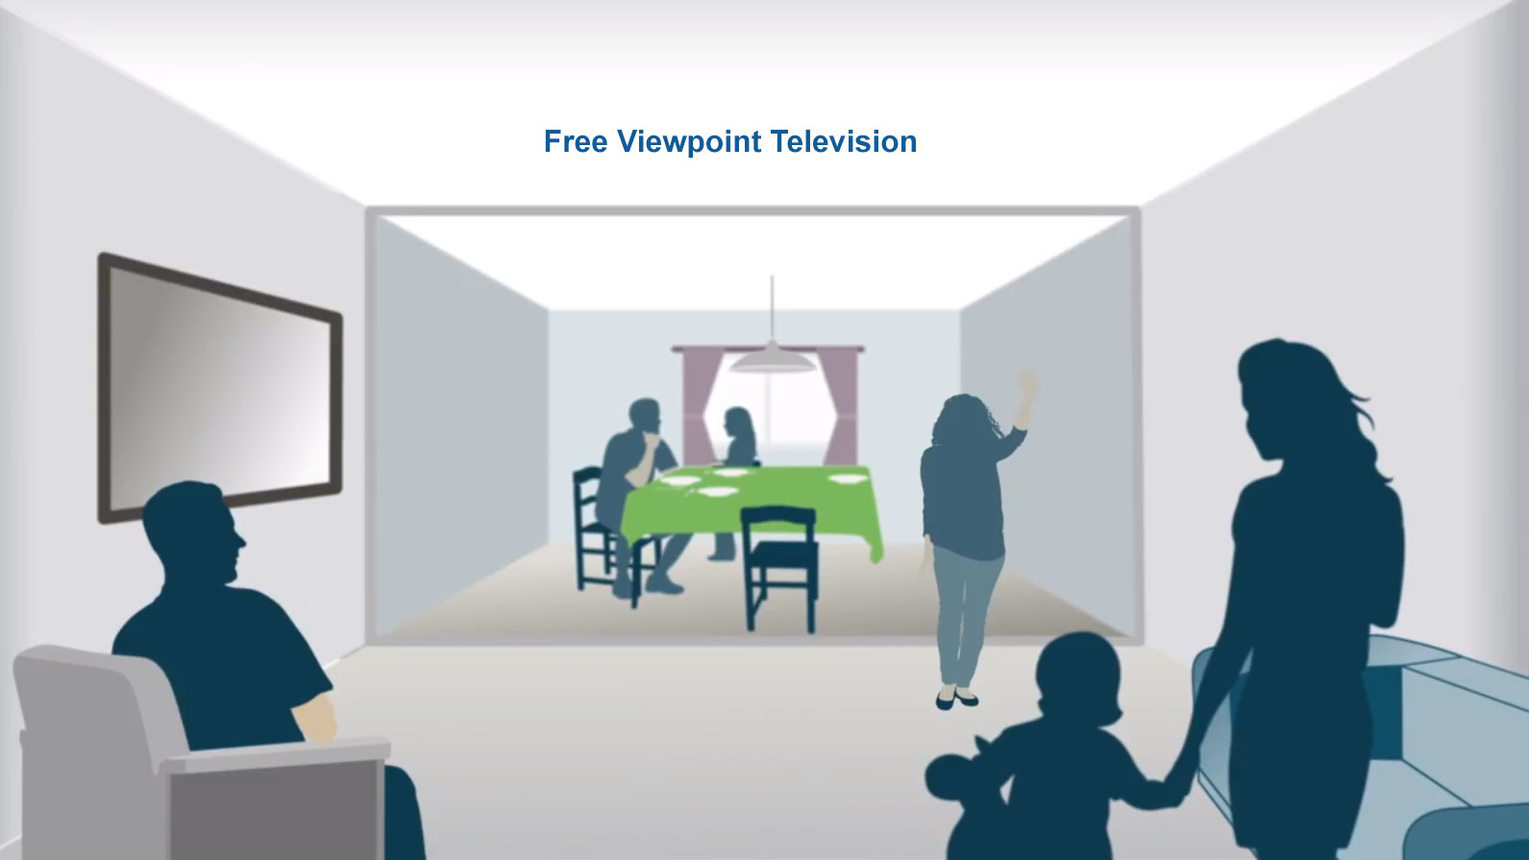 SPS Video: Free Viewpoint Television